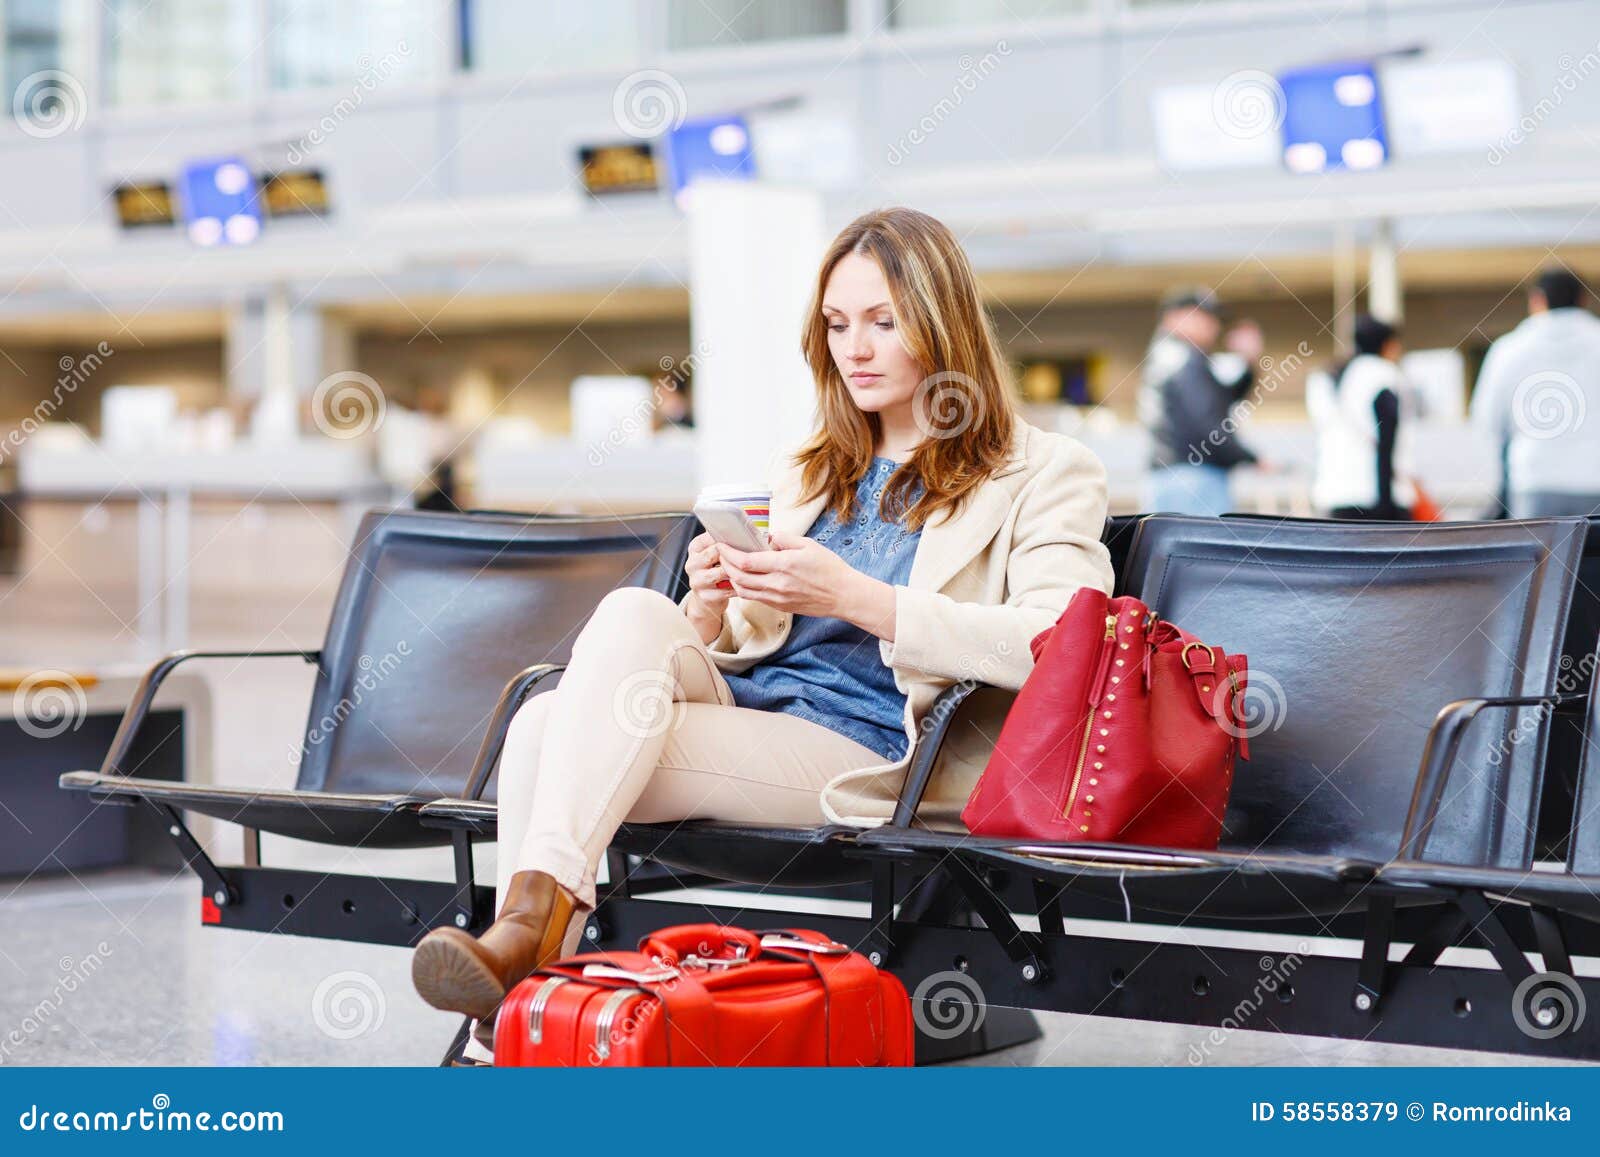 Foreign Women At Airport By 71